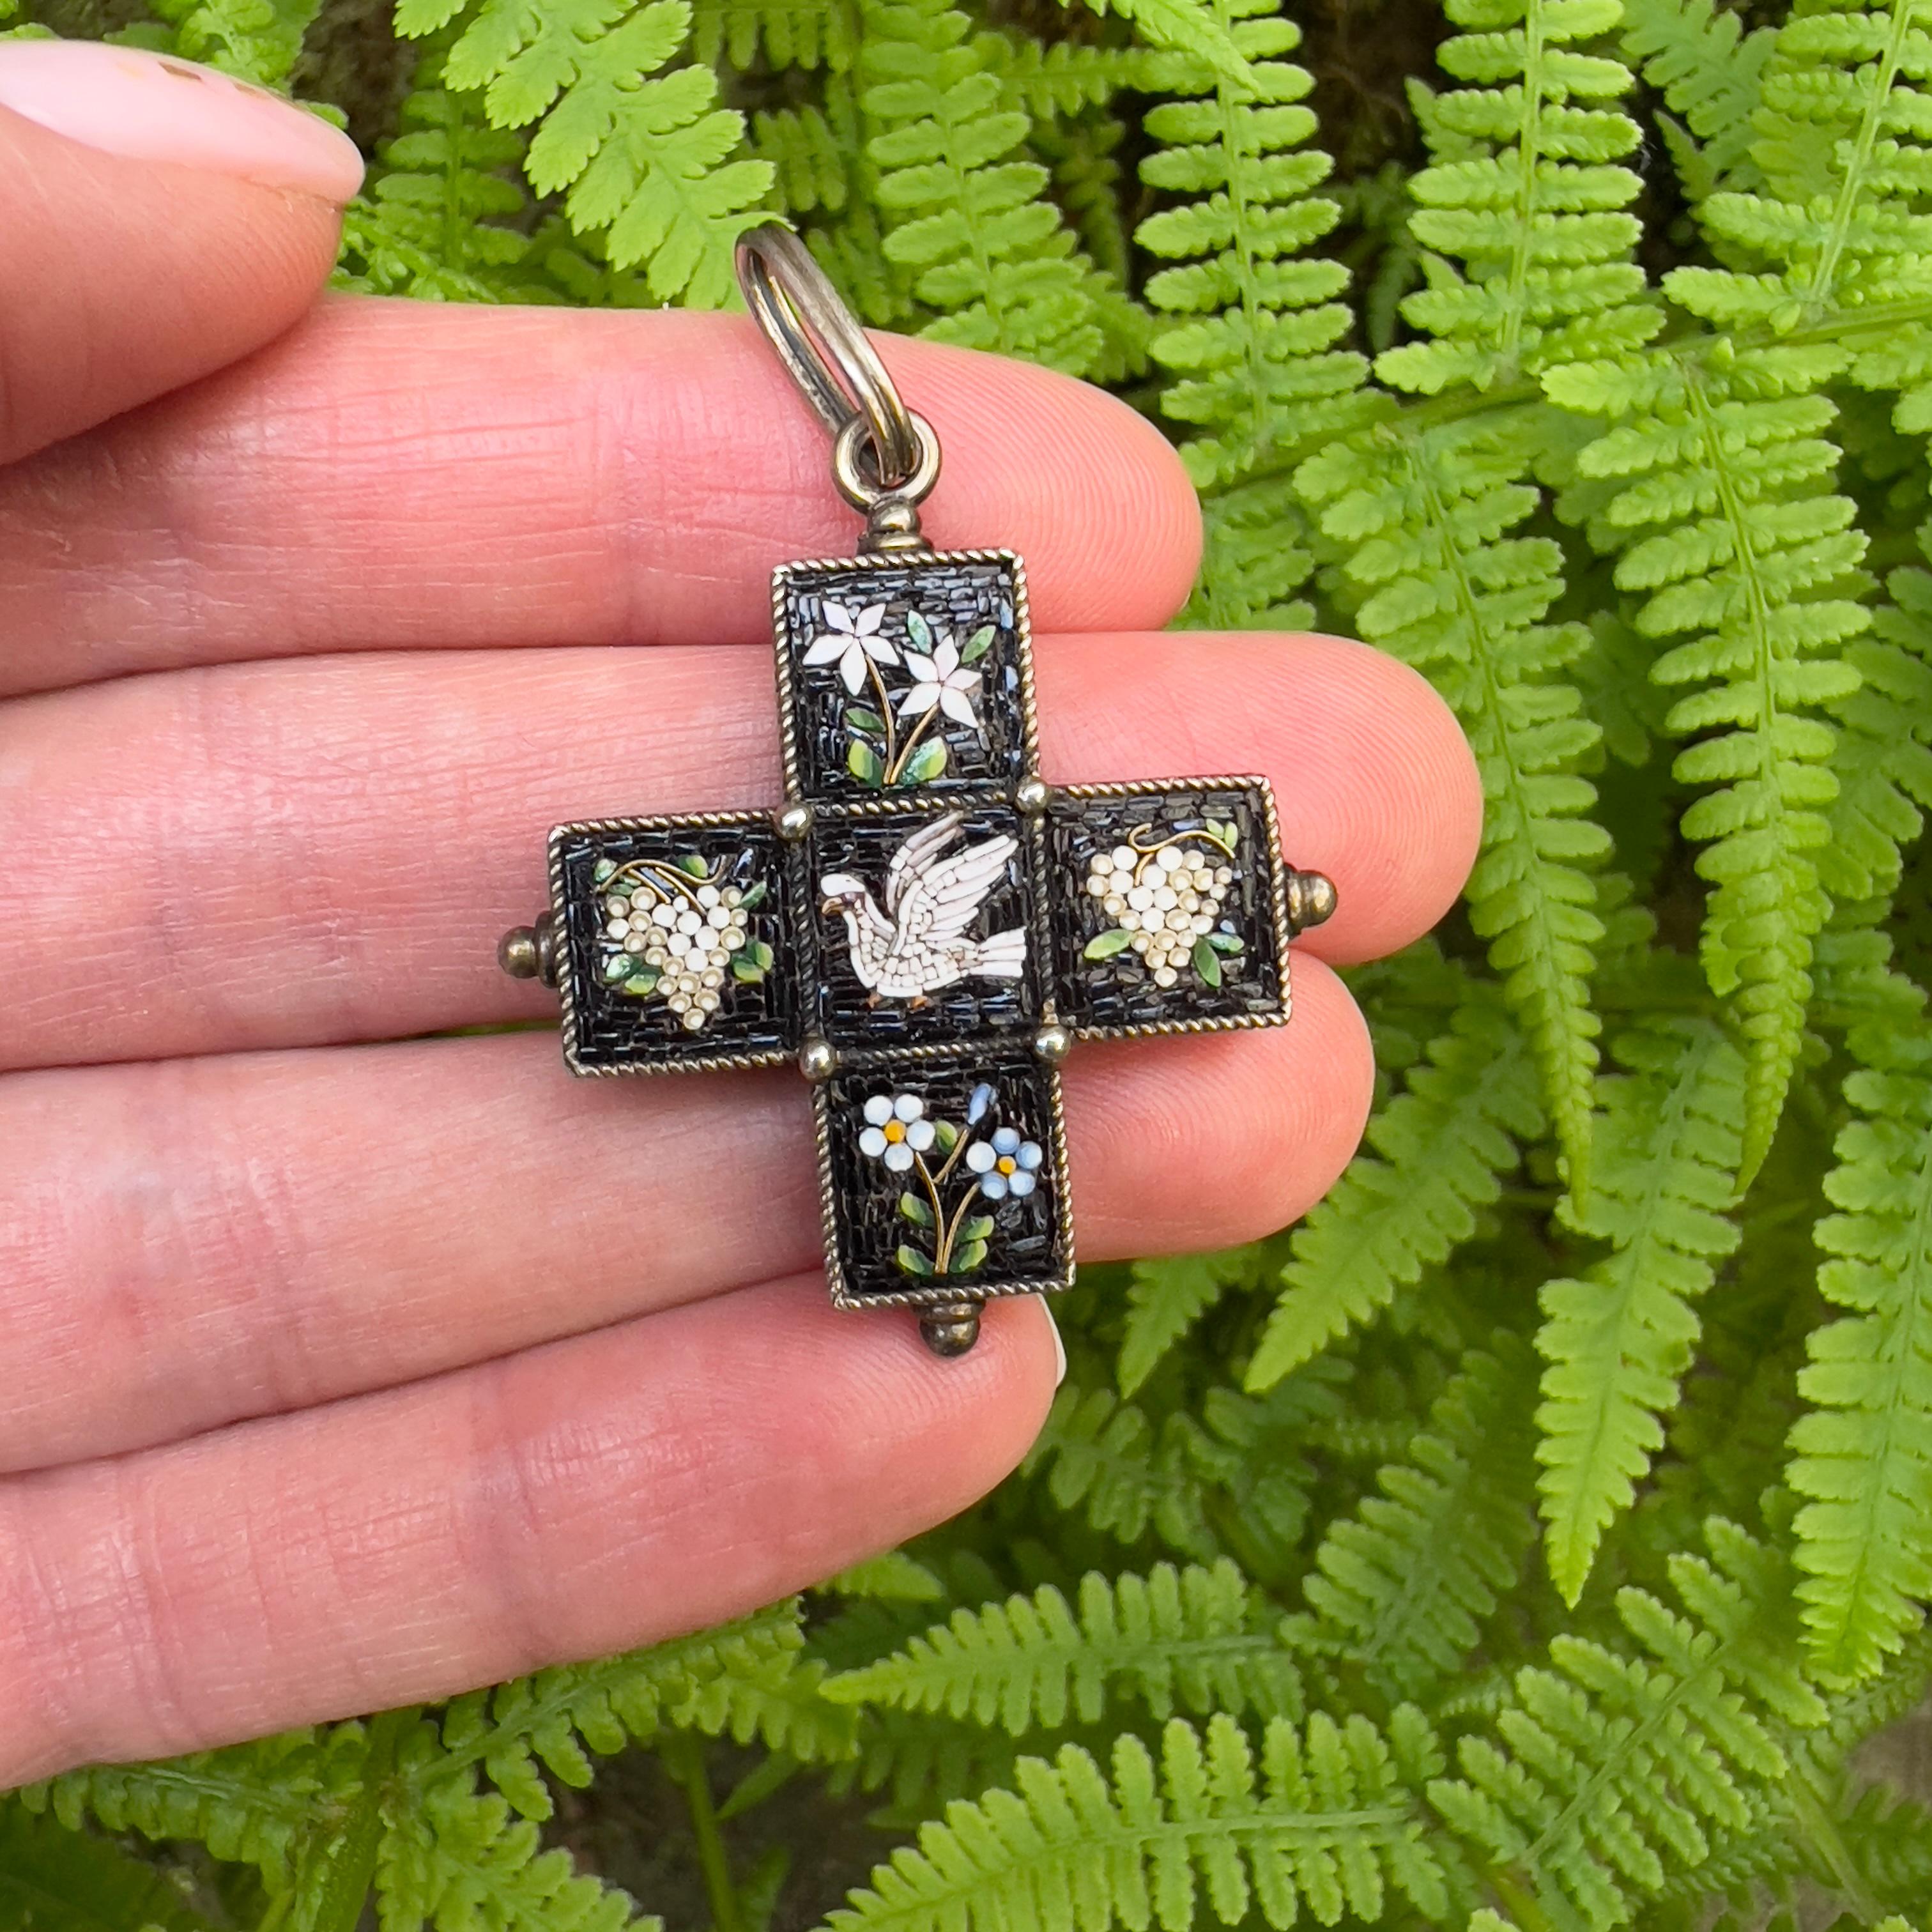 This beautiful pendant was created in Italy in the mid 1800s.

Condition Report:
Excellent

The Details...
Although un-hallmarked, this pendant tests as being constructed from silver. It features high quality and finely detailed micro-mosaic